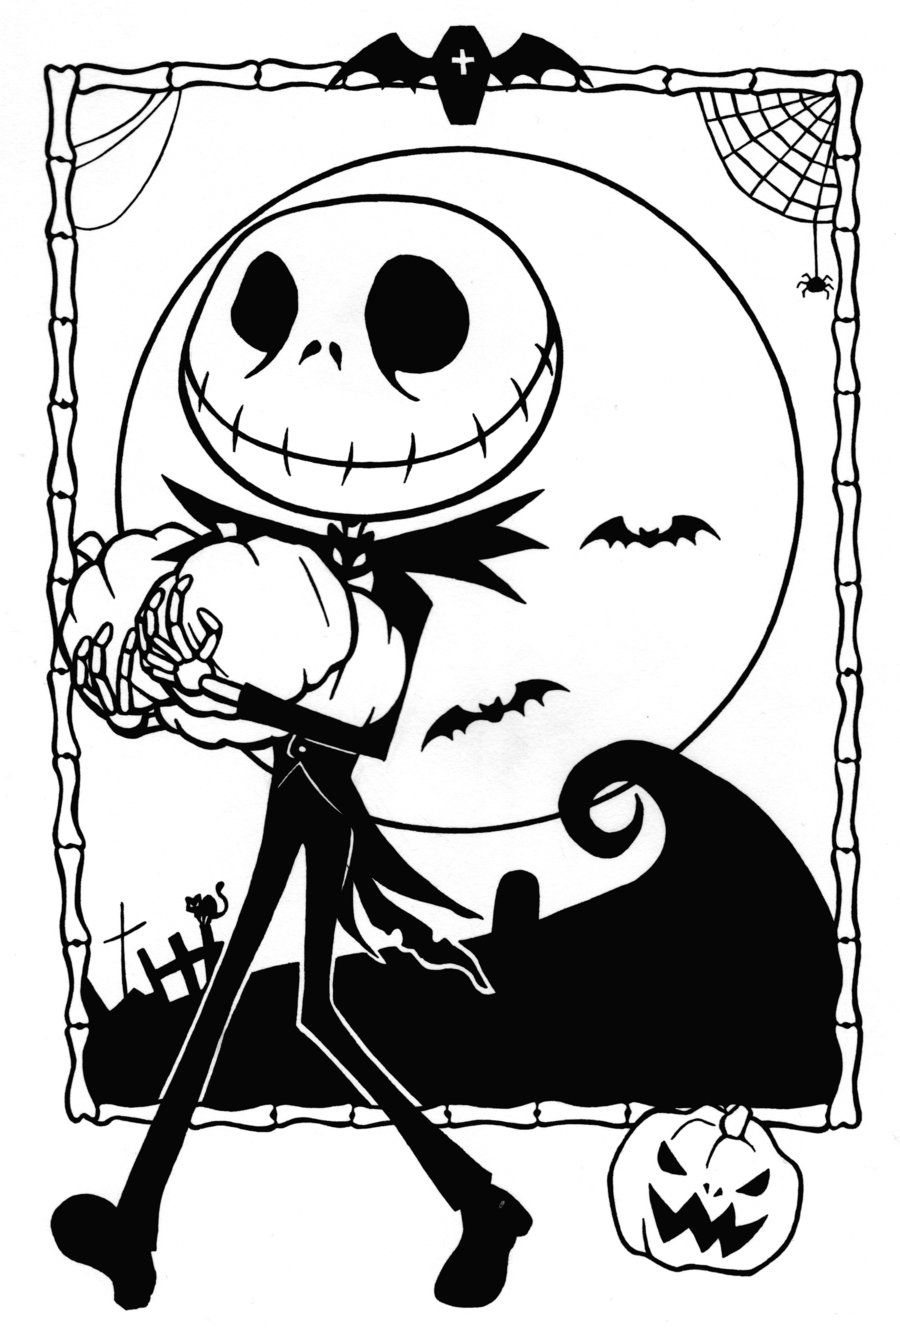 Free Printable Nightmare Before Christmas Coloring Pages Best Coloring Pages For Kids Halloween Coloring Pages Halloween Coloring Pages Printable Coloring Pages